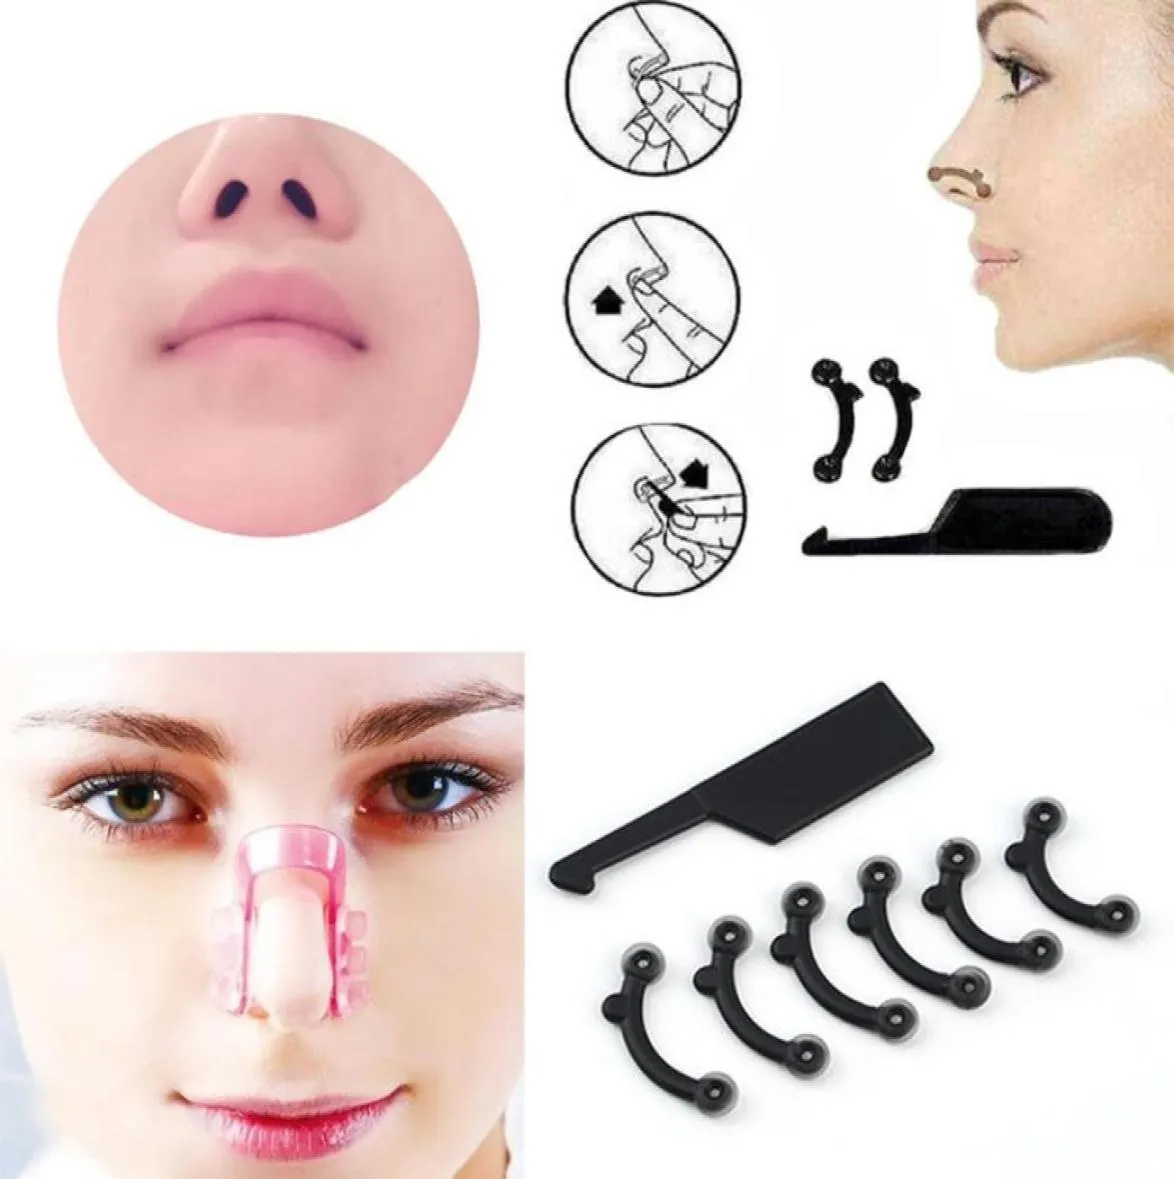 Beauty Nose Suit 3 Pairs of Different Sizes of Black 3D Silicone Nasal Bridge Heightening Device2106766